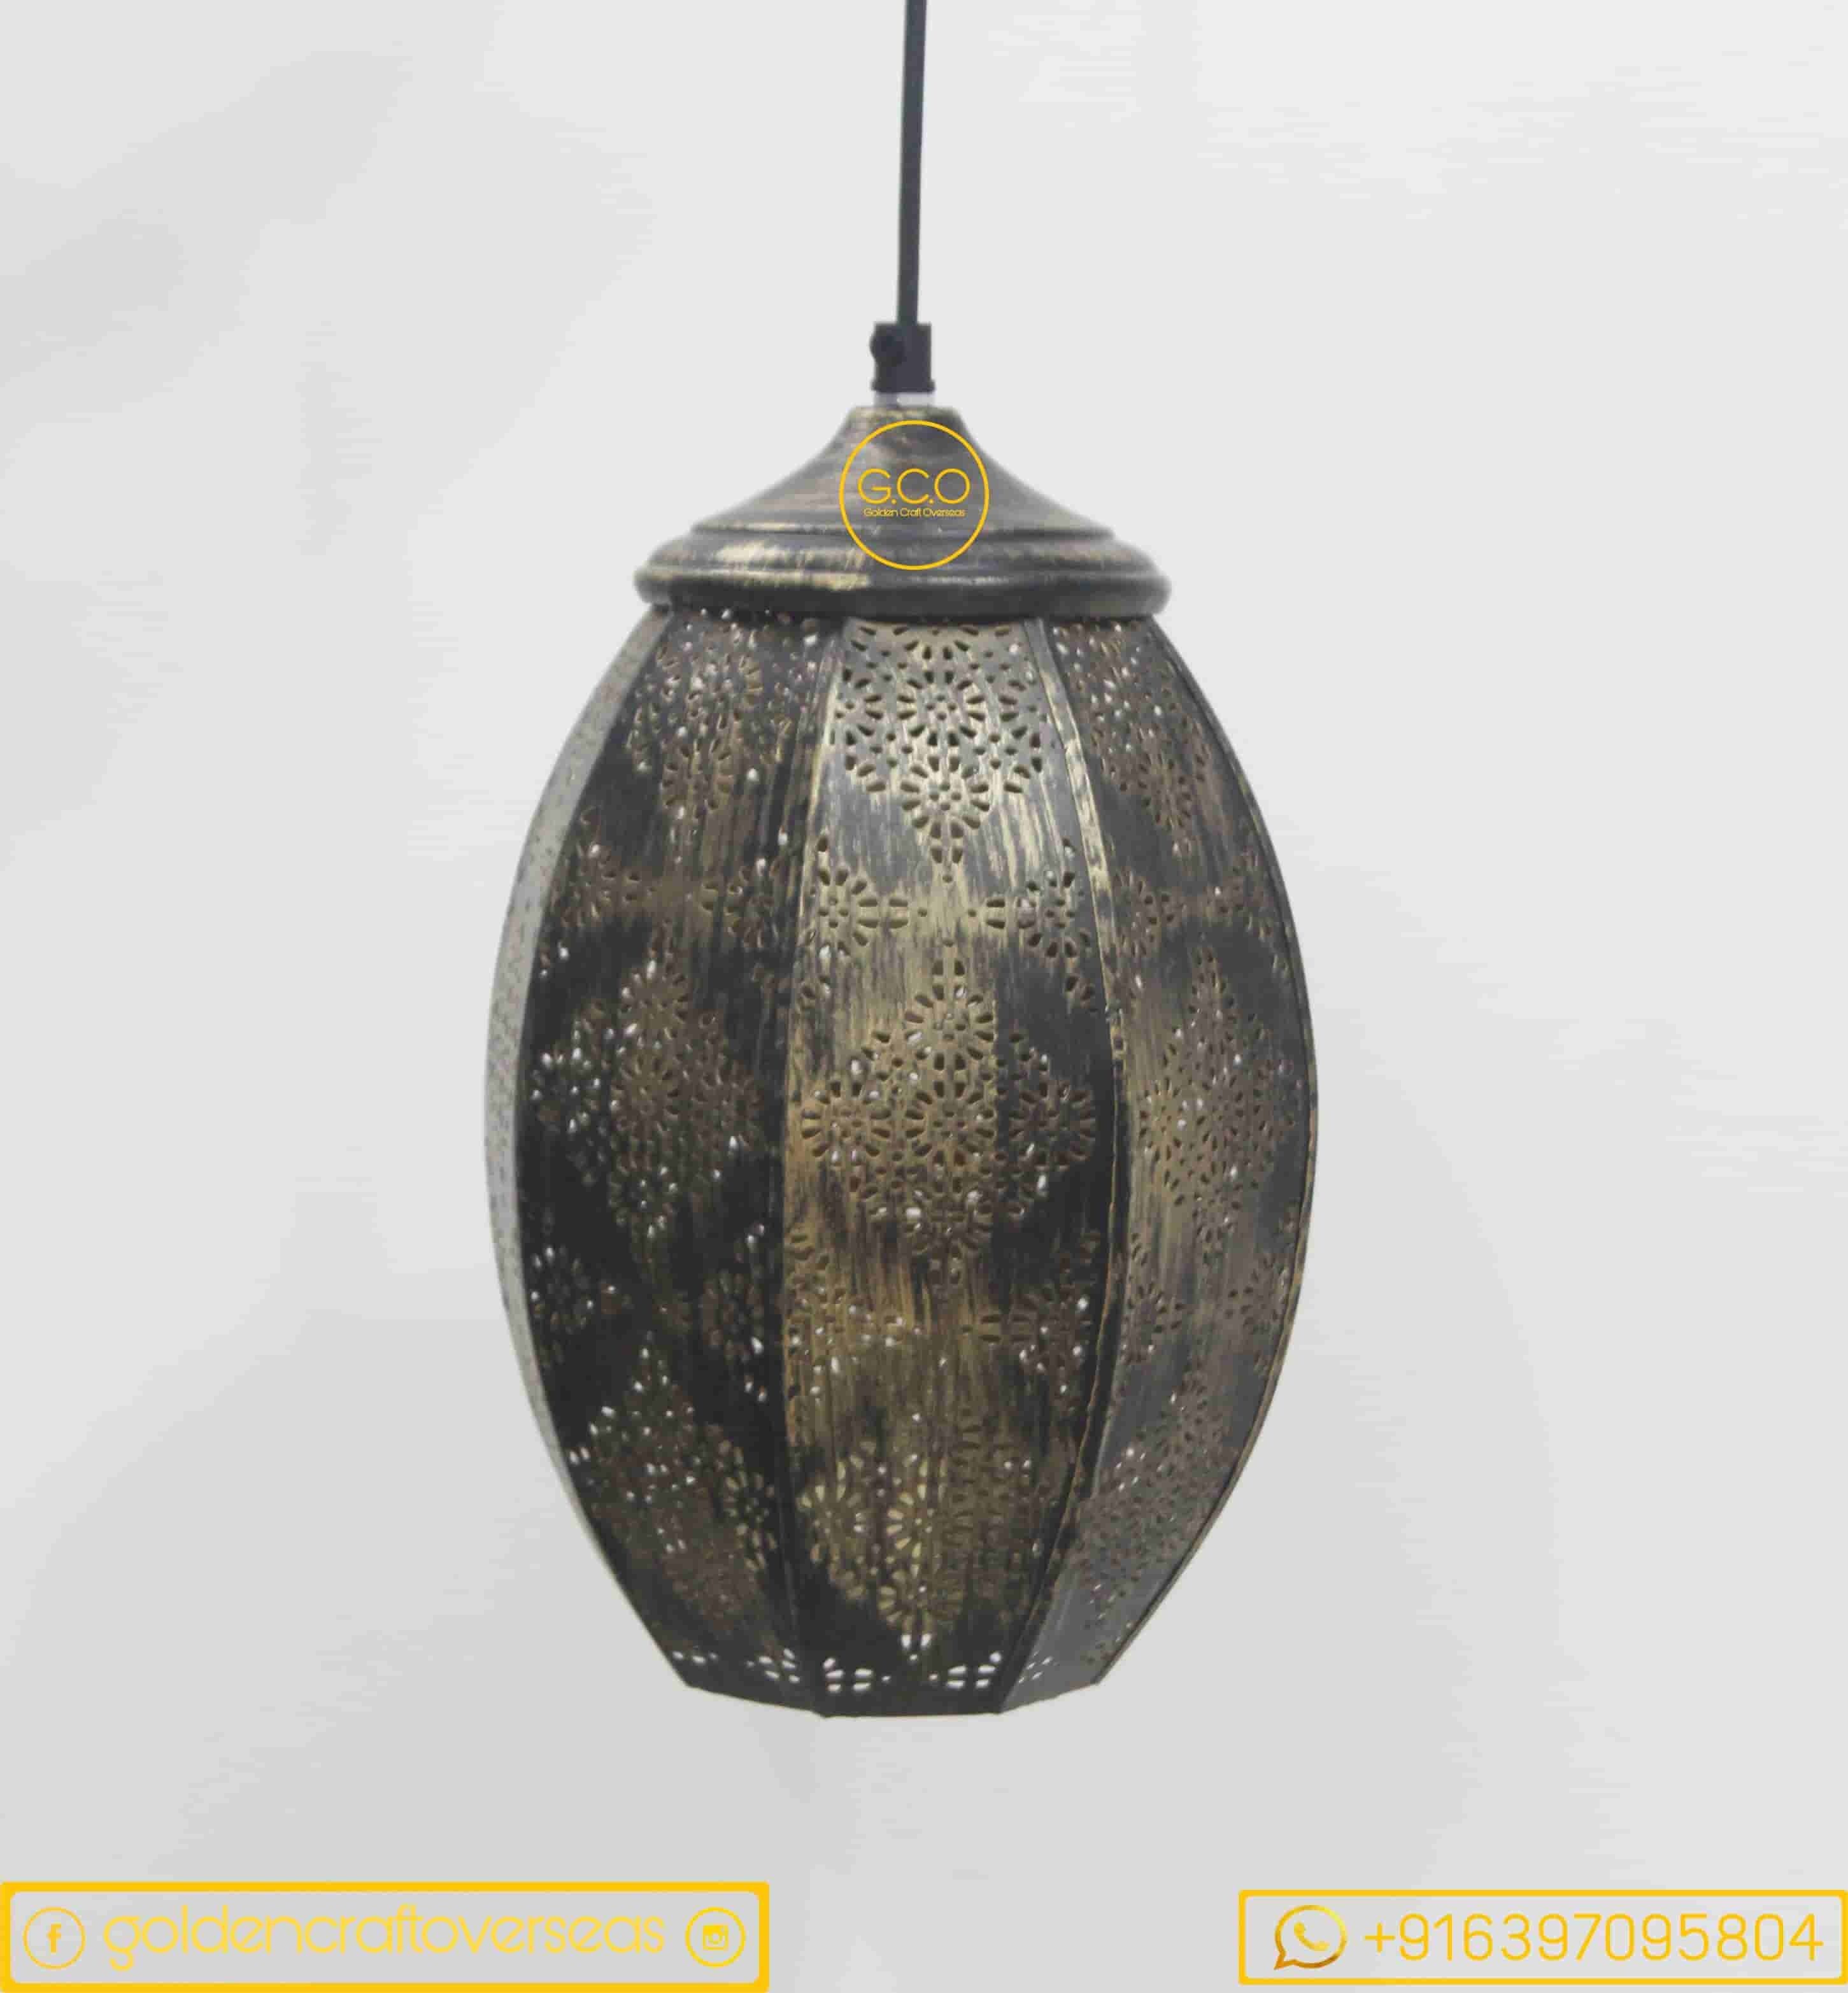 Hanging Oval Shape Moroccan Lamp Iron made antique powder coated finish